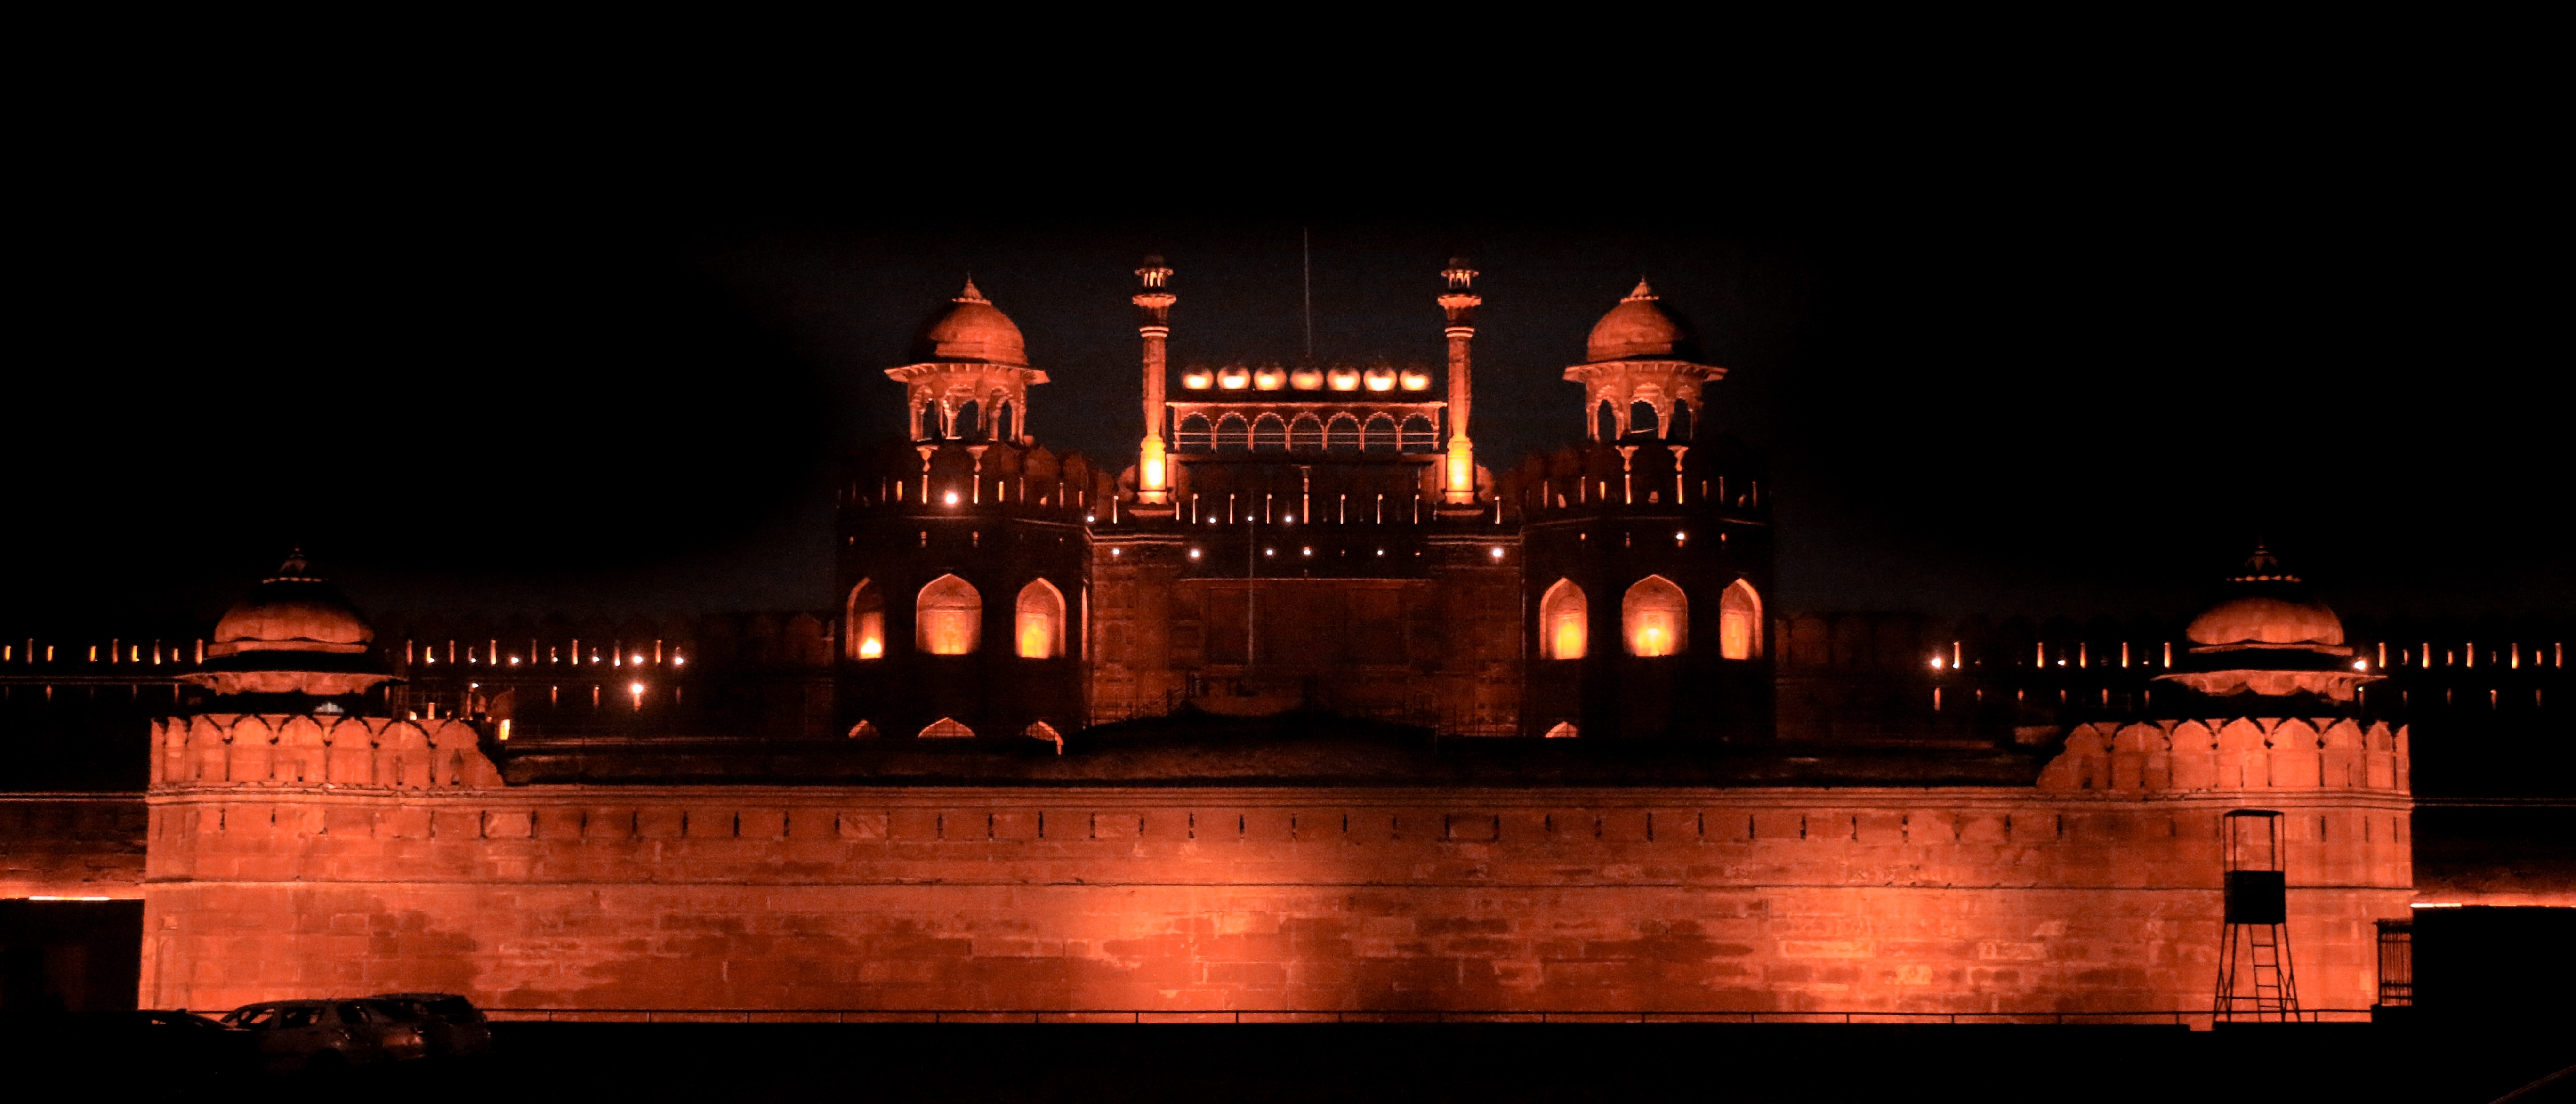 The Red Fort Photo by Godwin Angeline Benjo